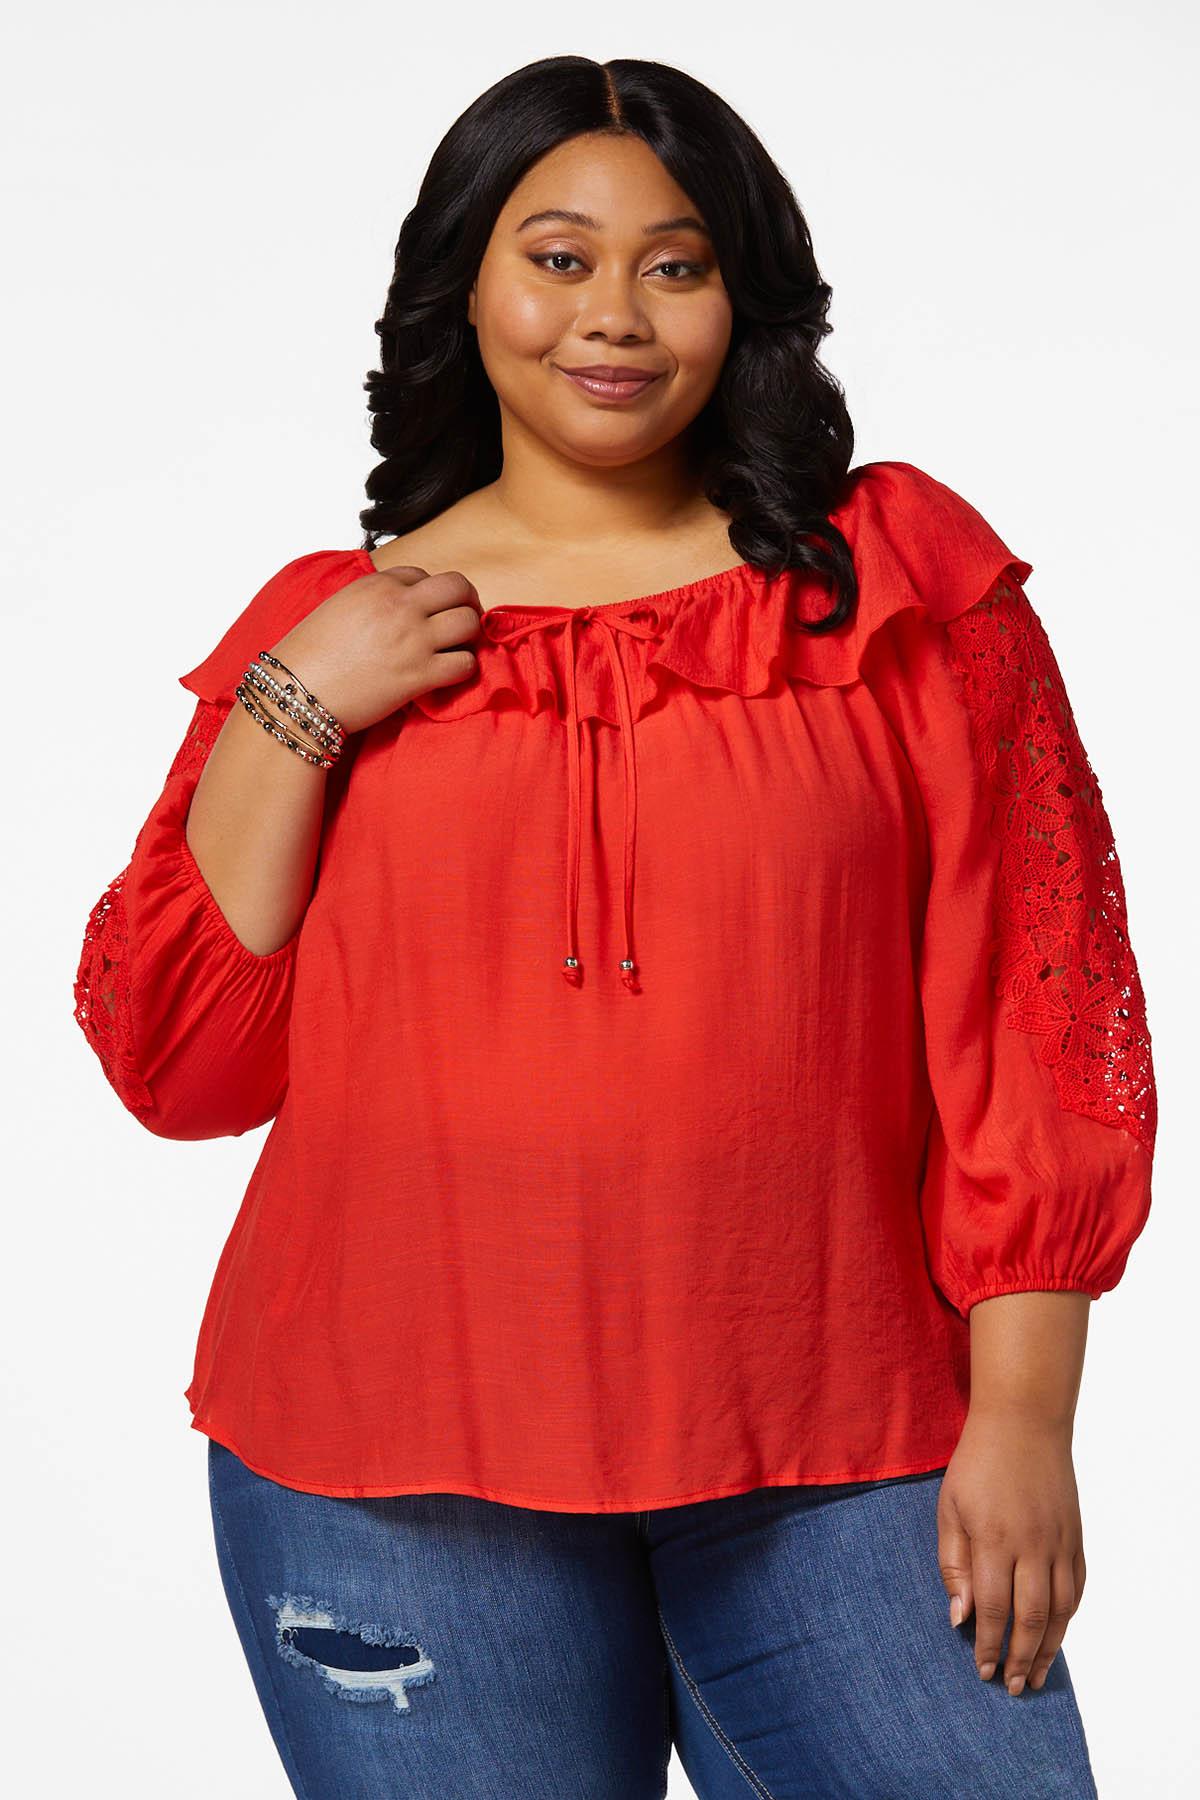 Cato Fashions  Cato Plus Size Red Lace Sleeve Top